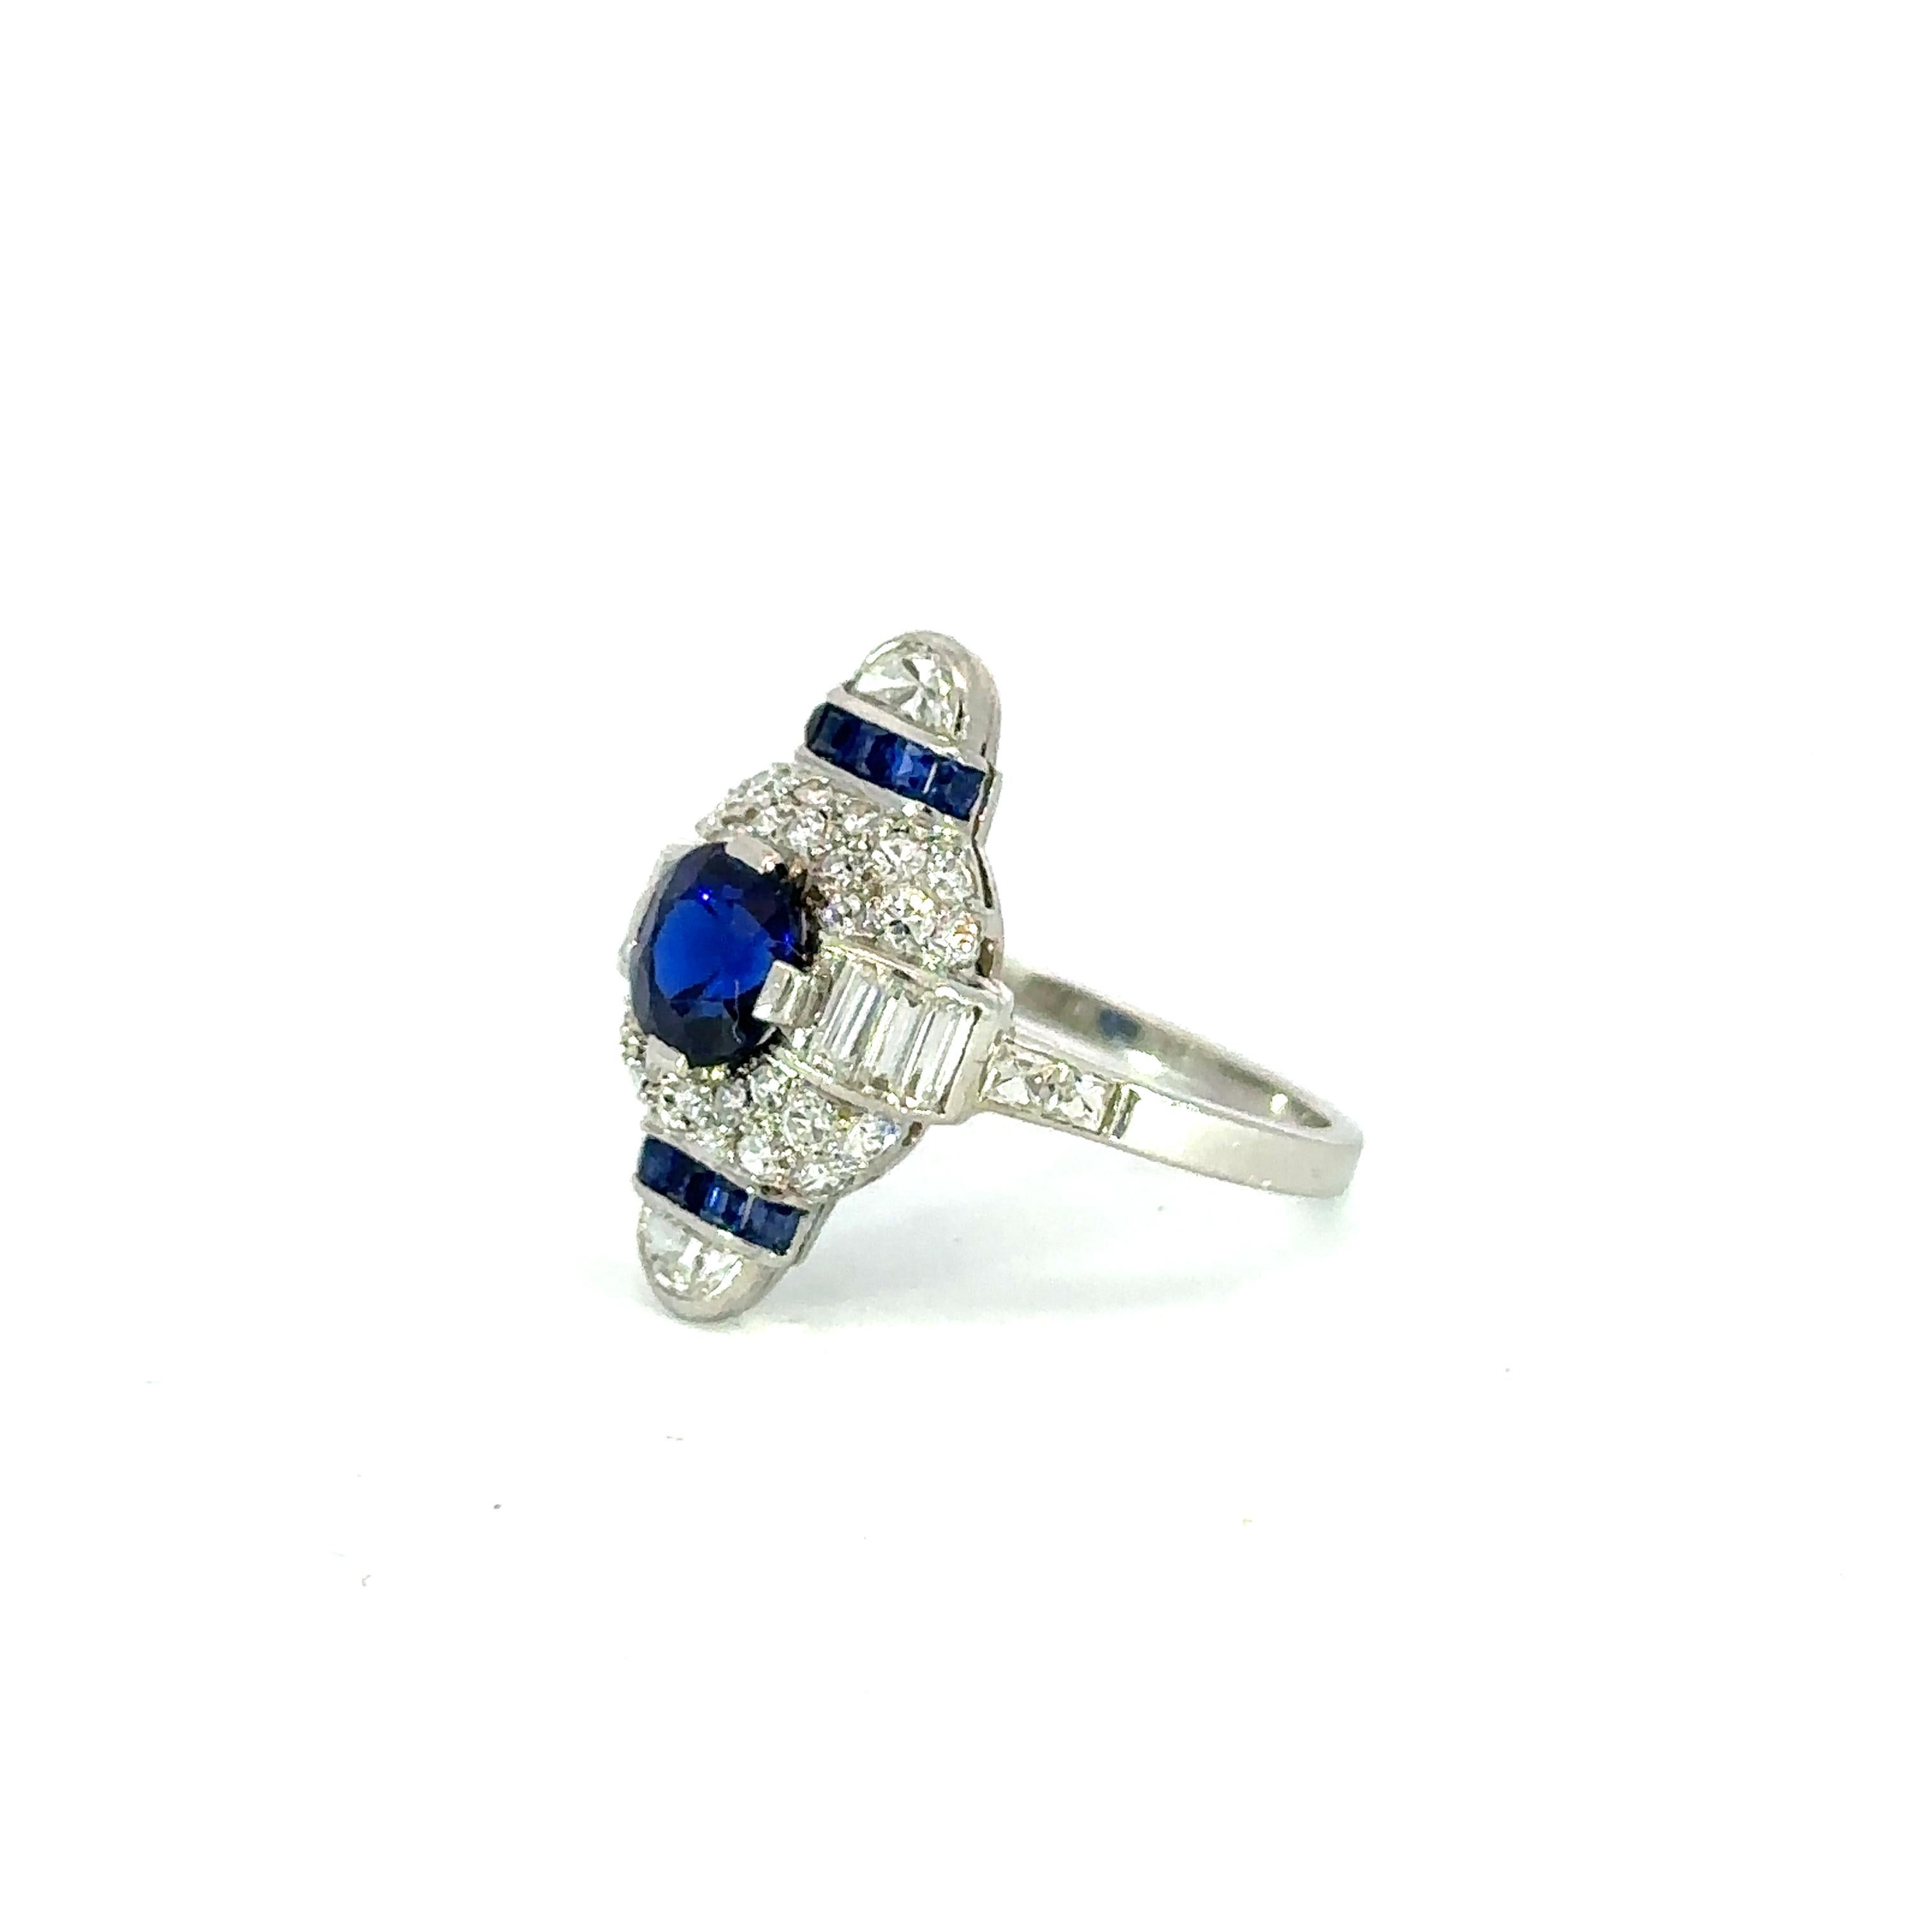 A blue sapphire Art Deco Cartier white gold cocktail ring boasts a captivating deep blue sapphire at its center, encircled by diamonds. Its design showcases geometric shapes, intricate filigree, and milgrain detailing. The white gold setting exudes